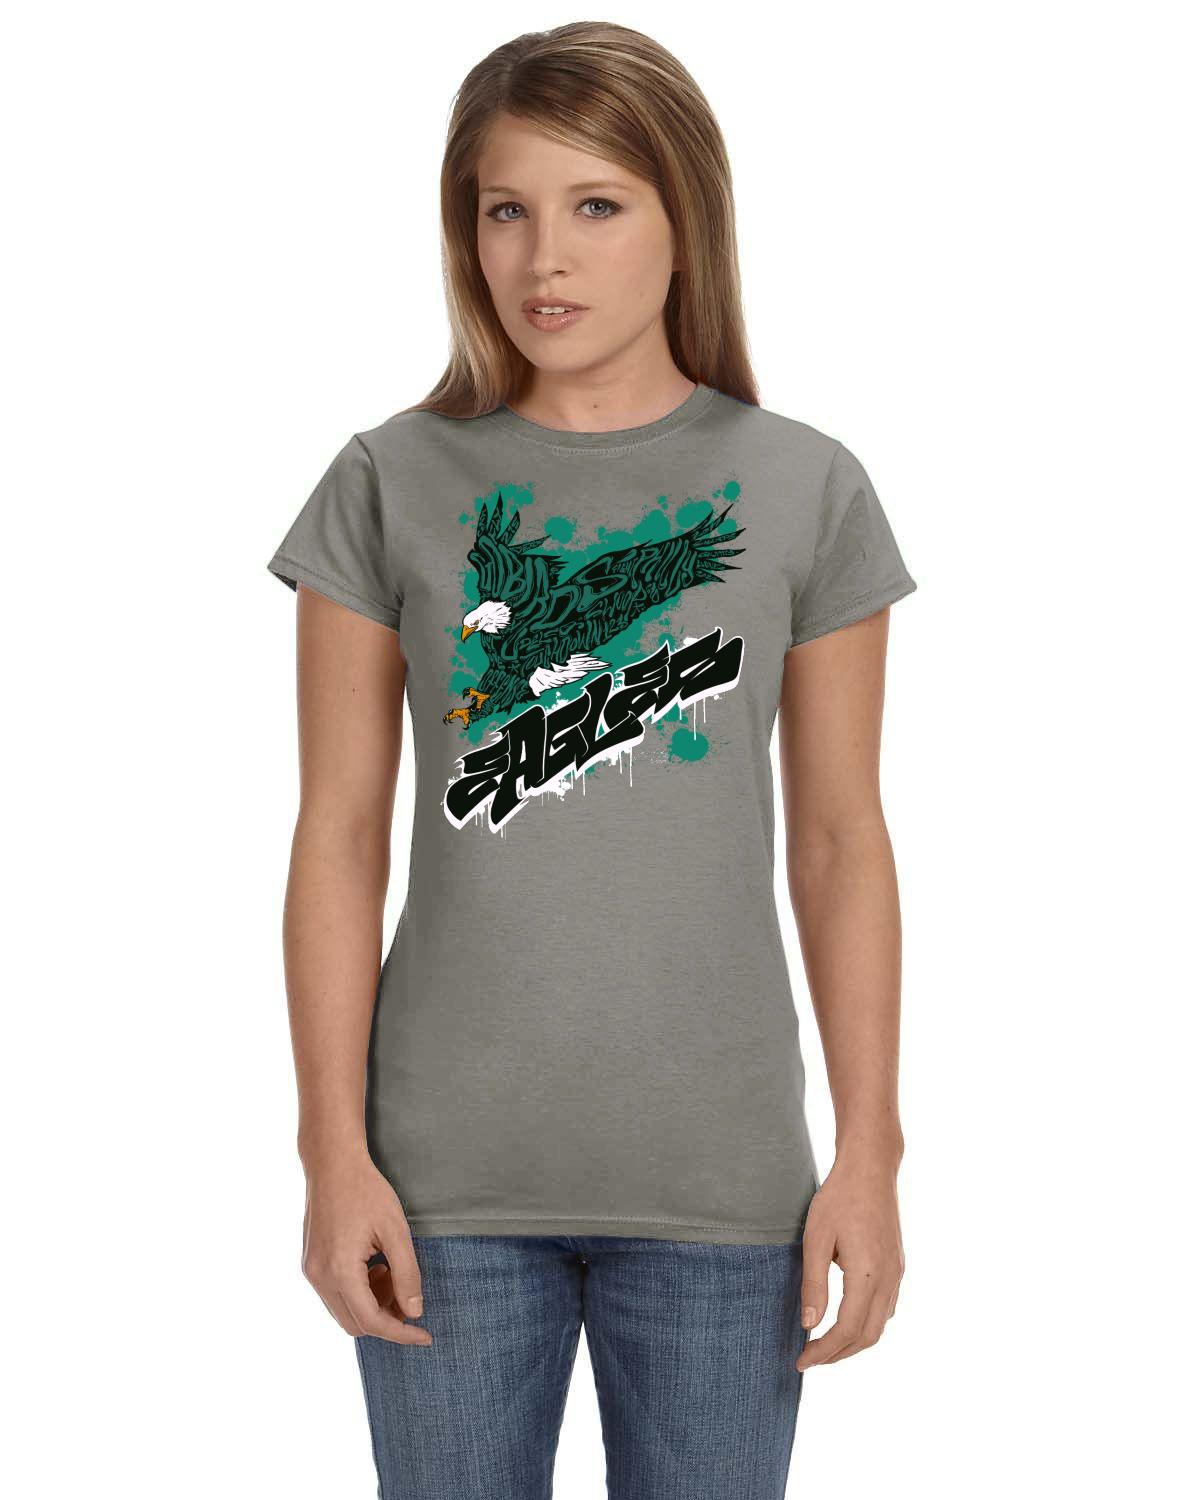 Eagles Fly 2022 Gildan Ladies' Softstyle 7.5 oz./lin. yd. Fitted T-Shirt | G640L